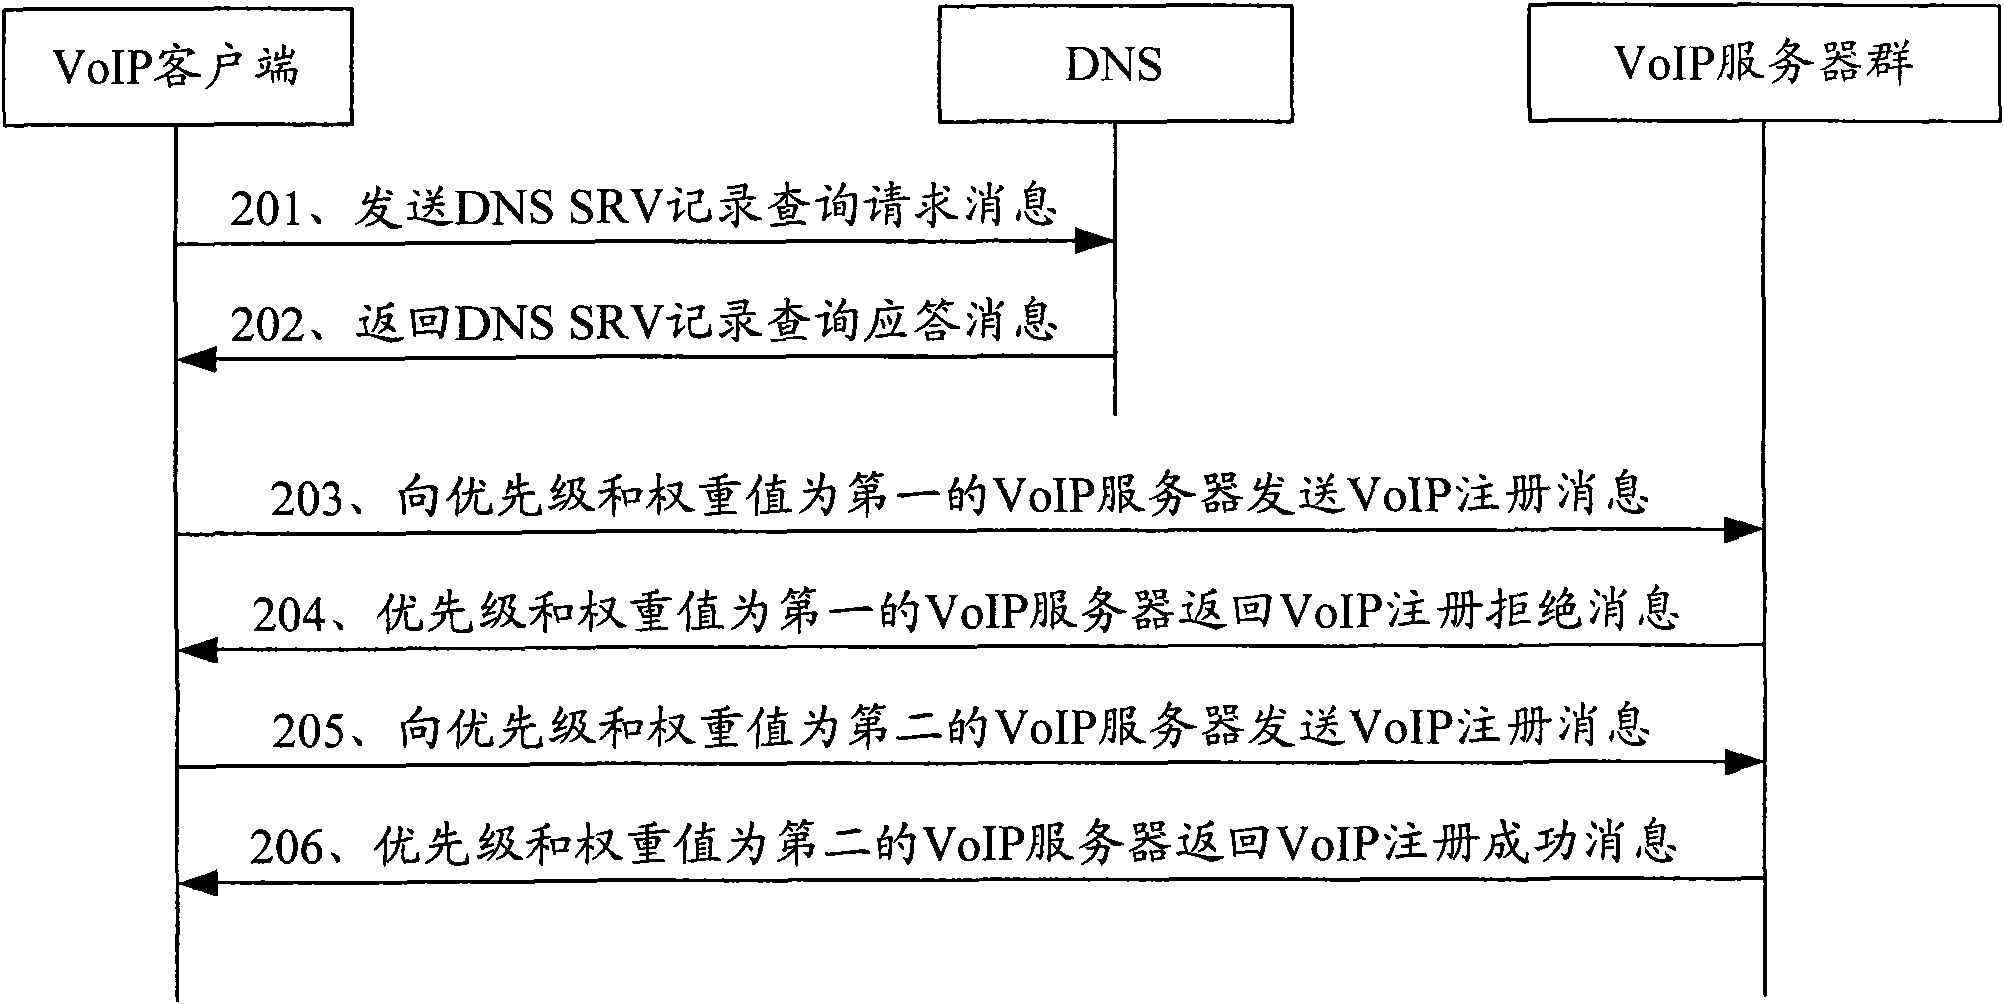 Method and system for guaranteeing quality of service of voice over internet protocol